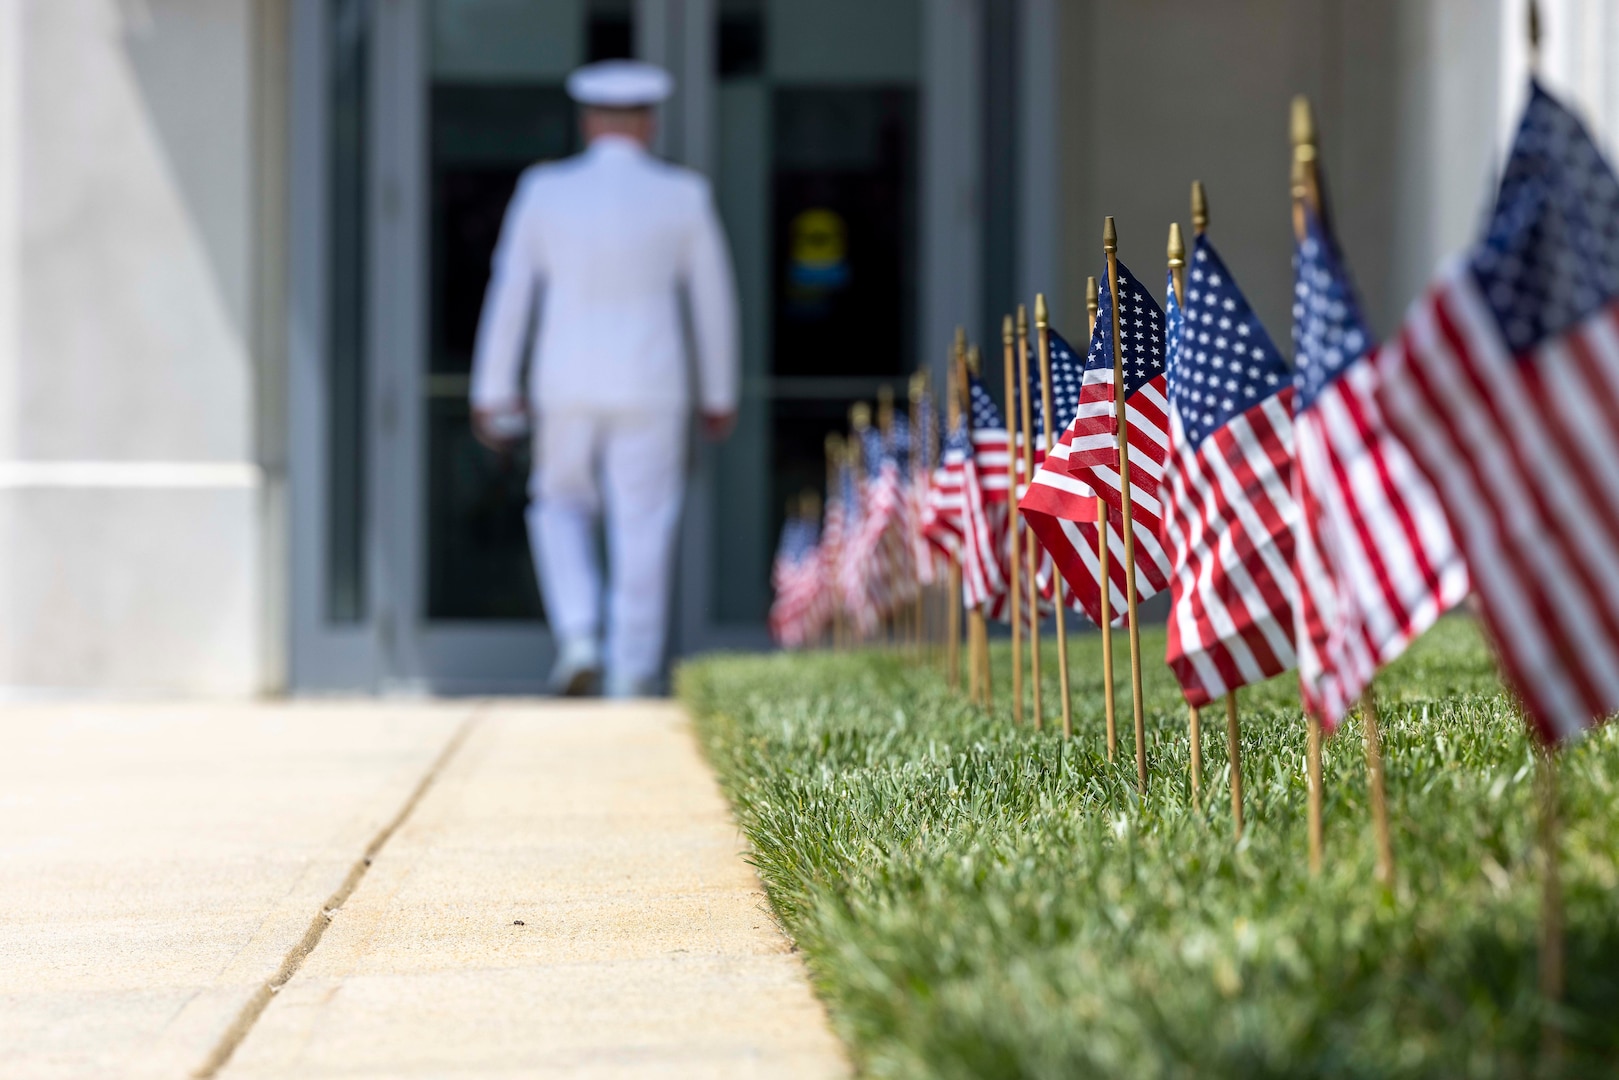 Miniature American Flags begin to sway gently in the morning air as Cmdr. Michael Smith, Naval Surface Warfare Center, Carderock Division’s Executive Officer, arrives at the change-of-command ceremony held in West Bethesda, Md., on May 12. (U.S. Navy photo by Devin Pisner)